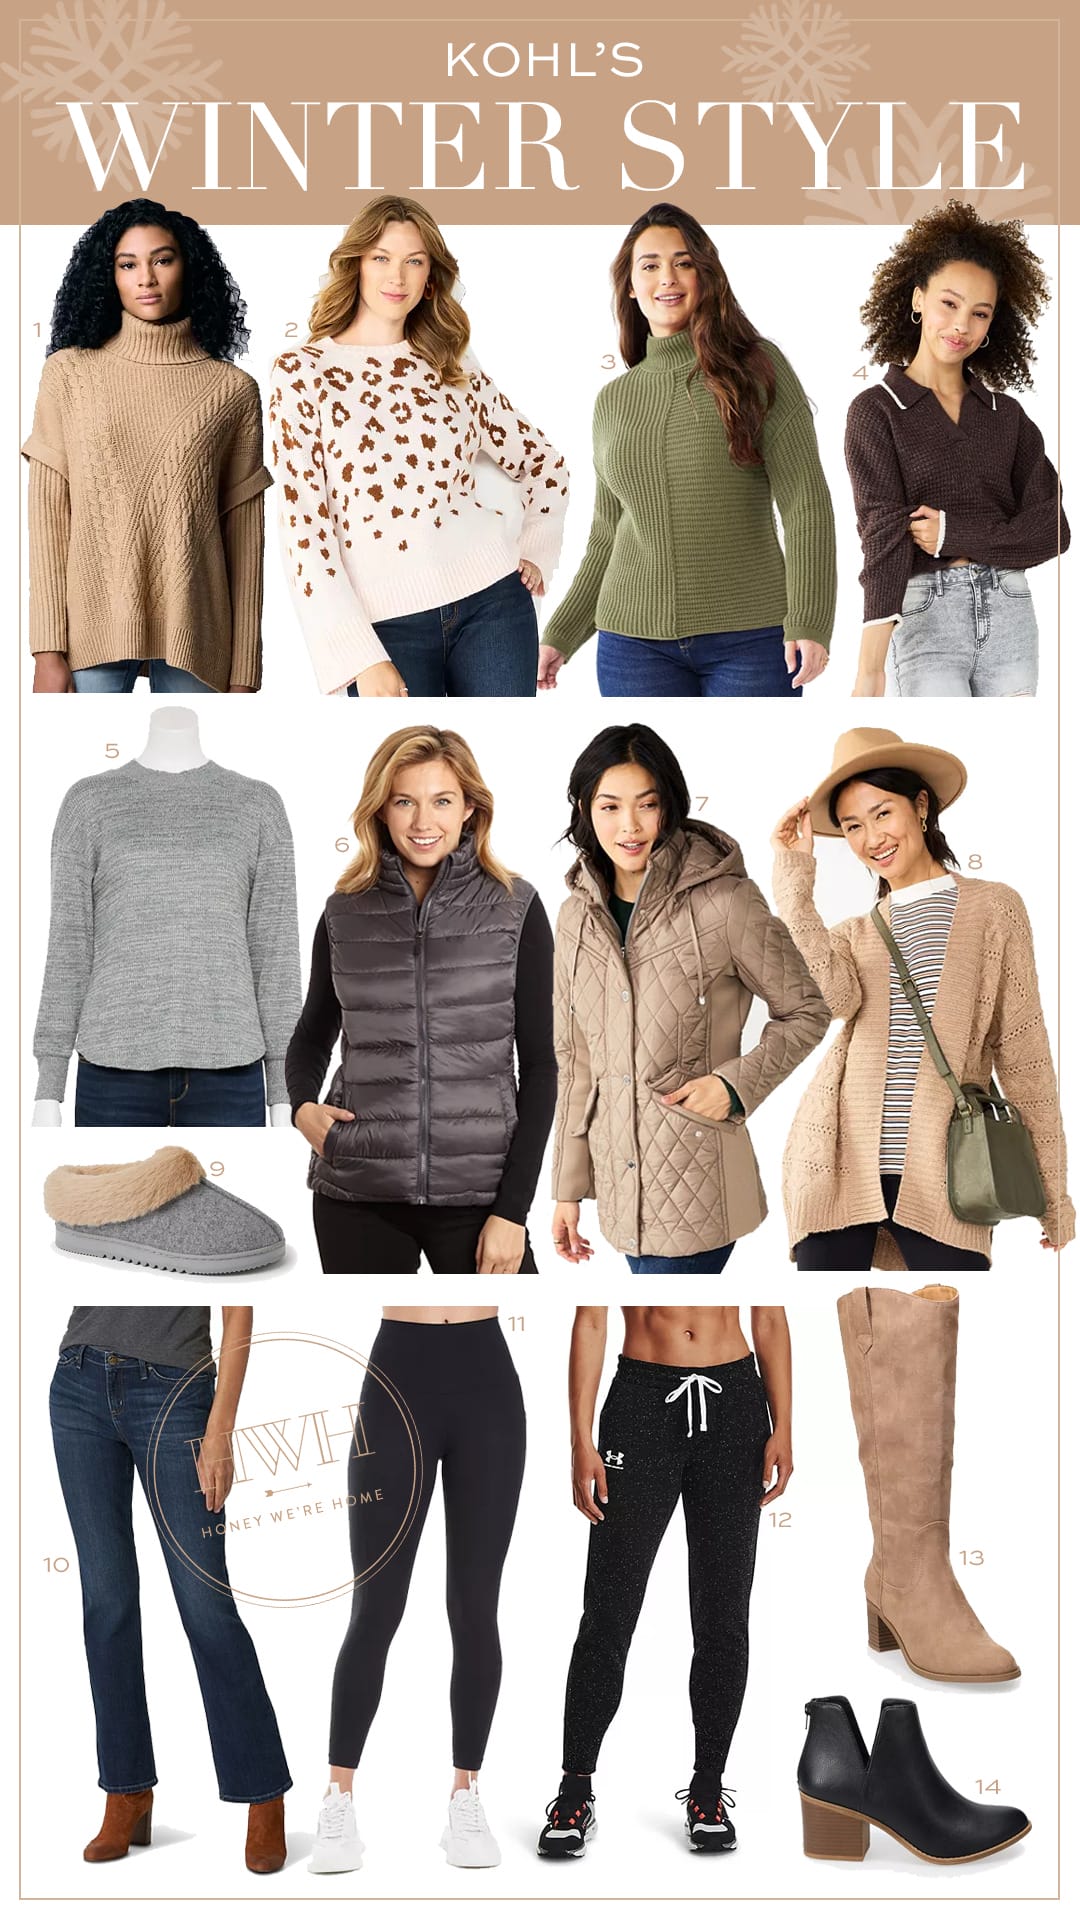 Trendy Fall and Winter Clothes and Accessories From Kohl's